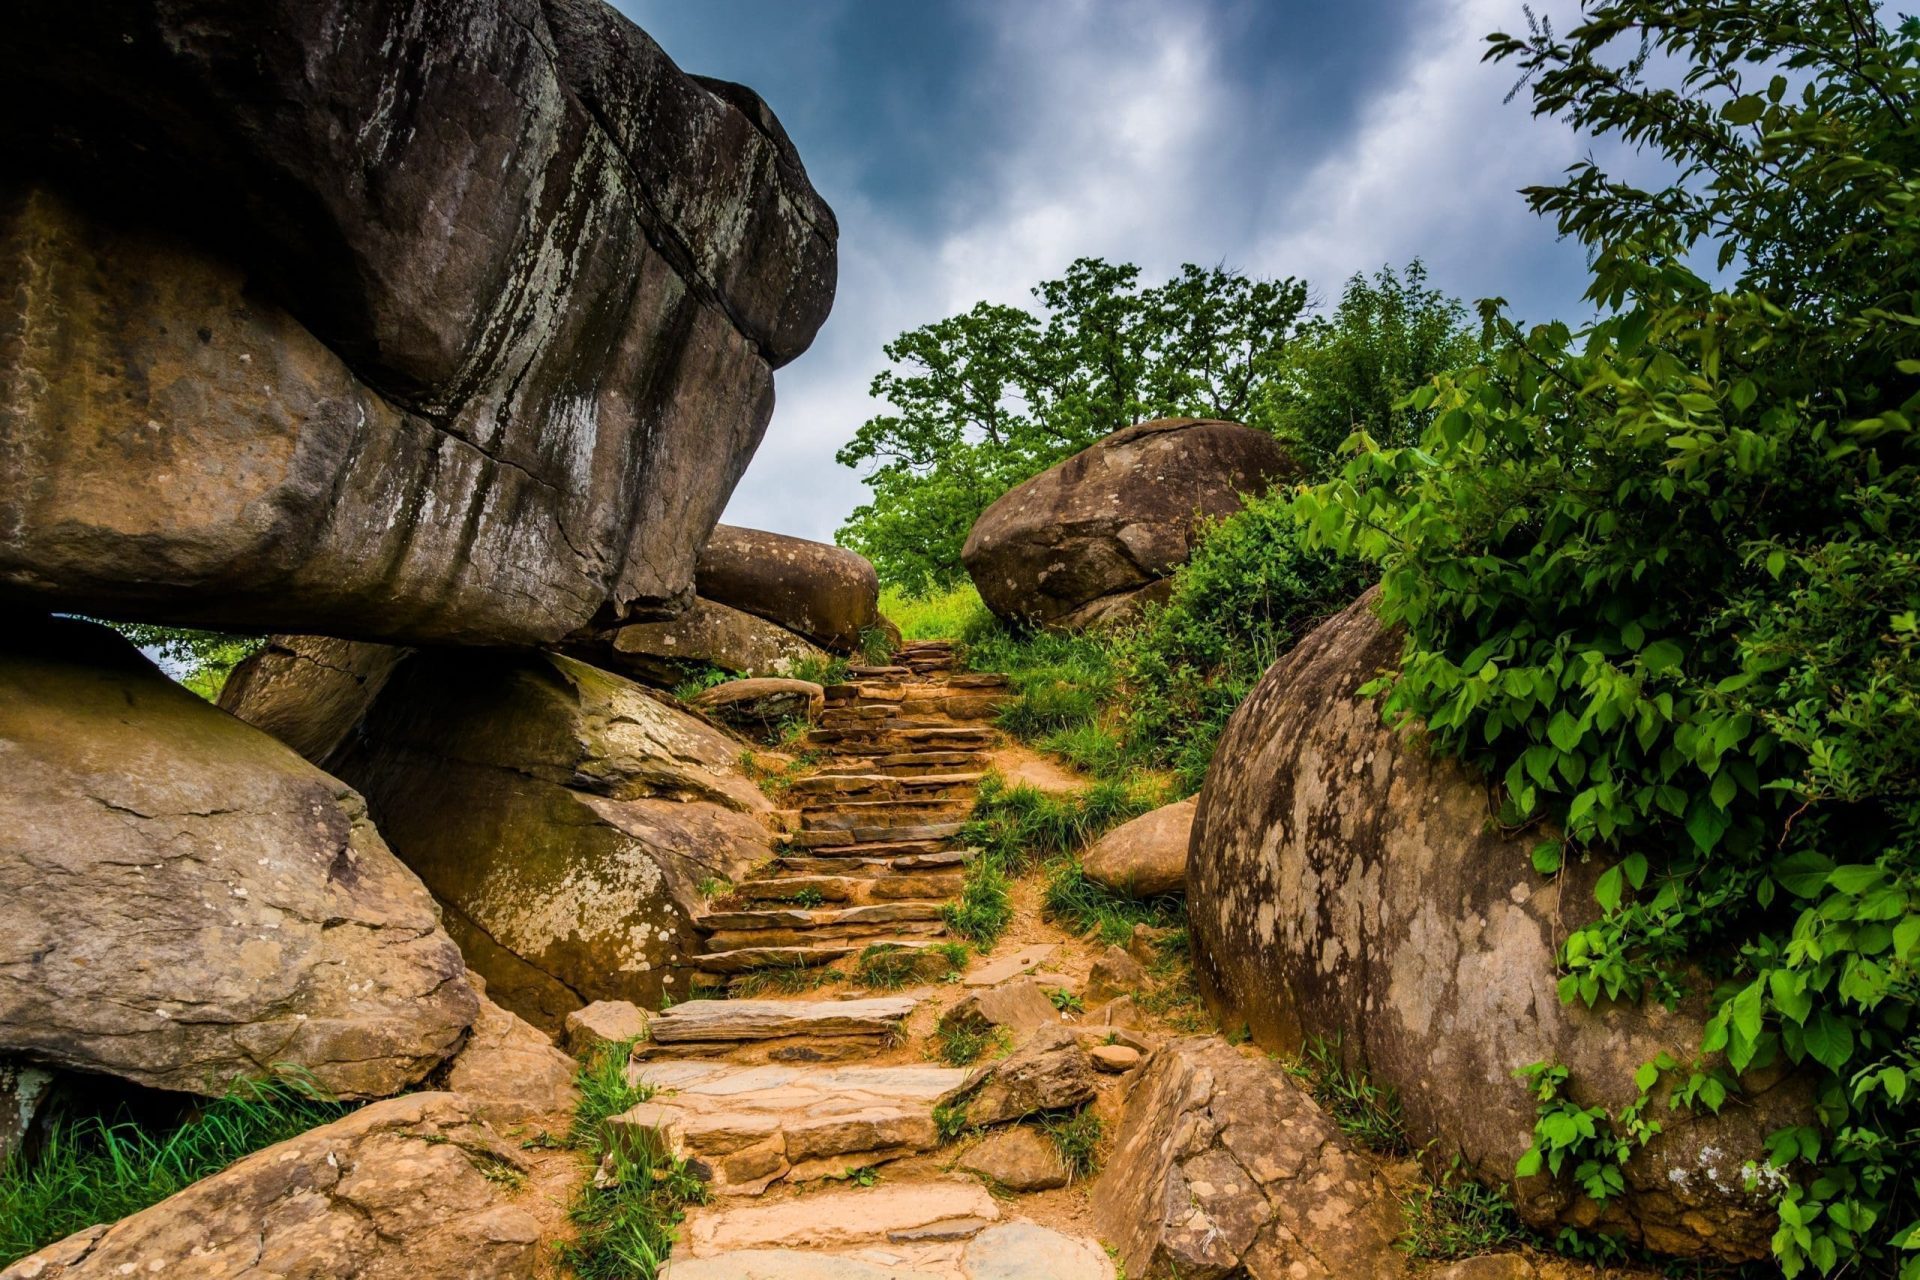 Have You Really Been to Devil's Den? A Gettysburg Battlefield